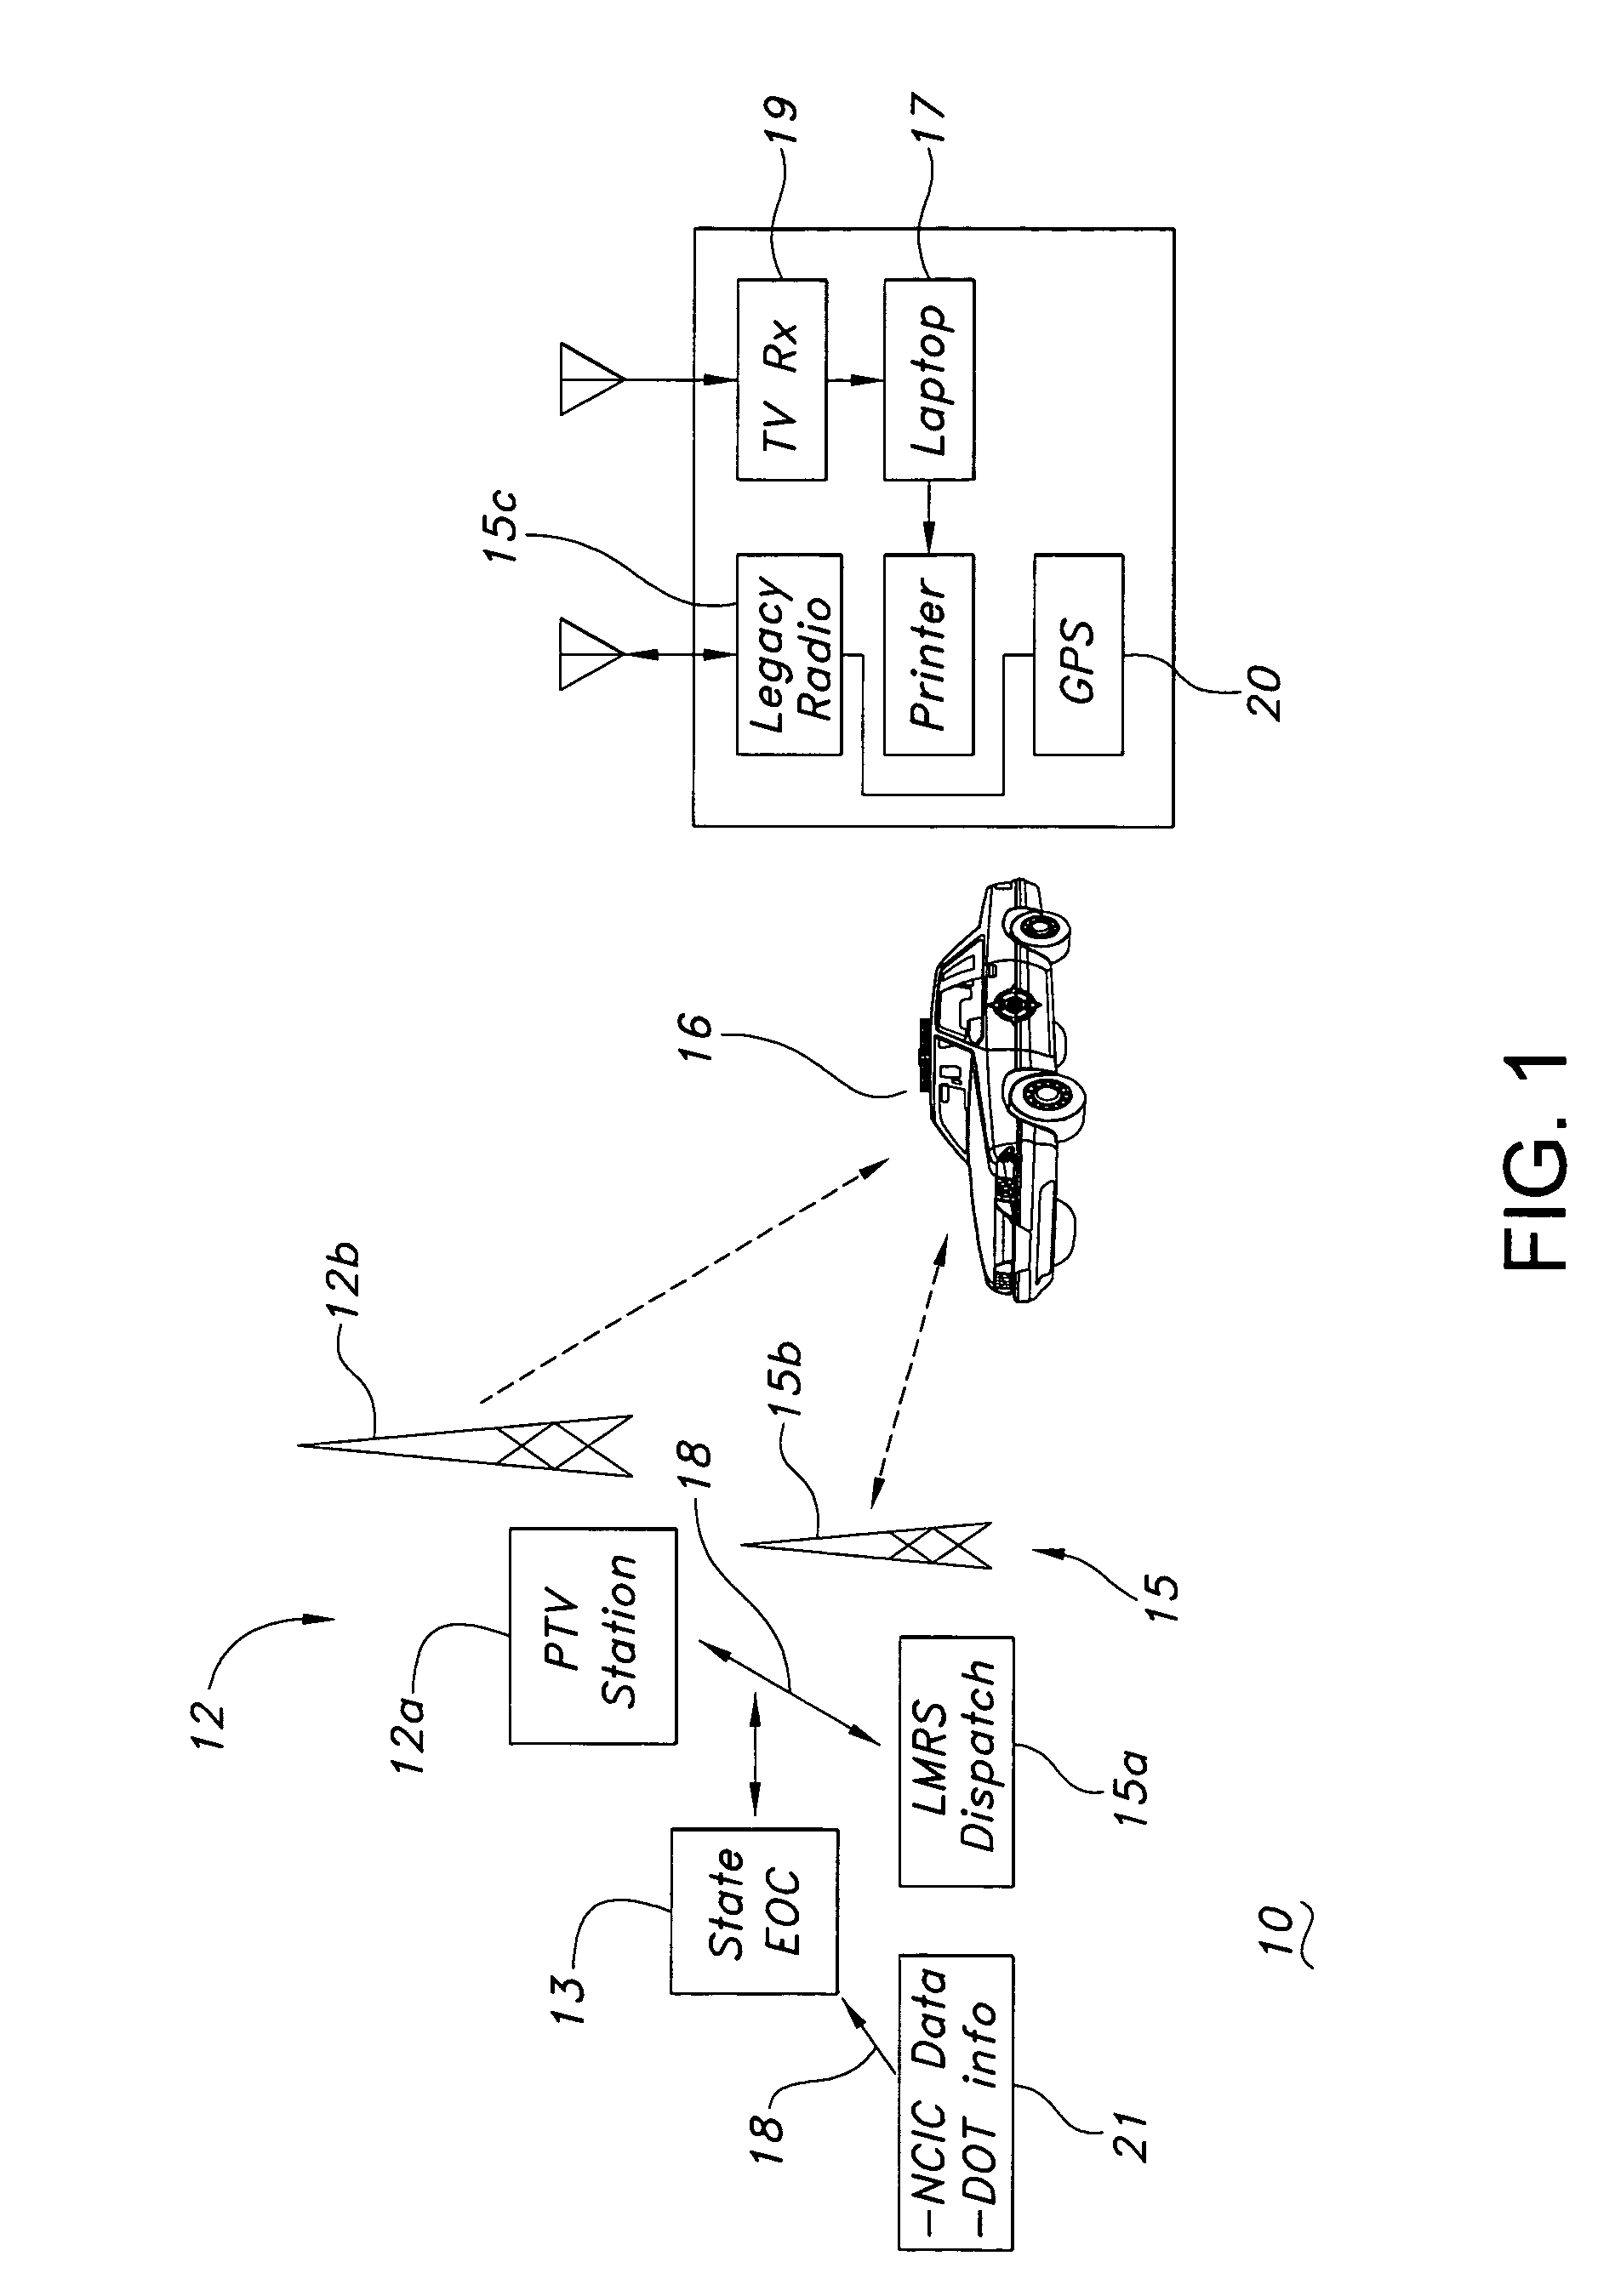 Variable rate forward error correction regulation system and method based on position location information